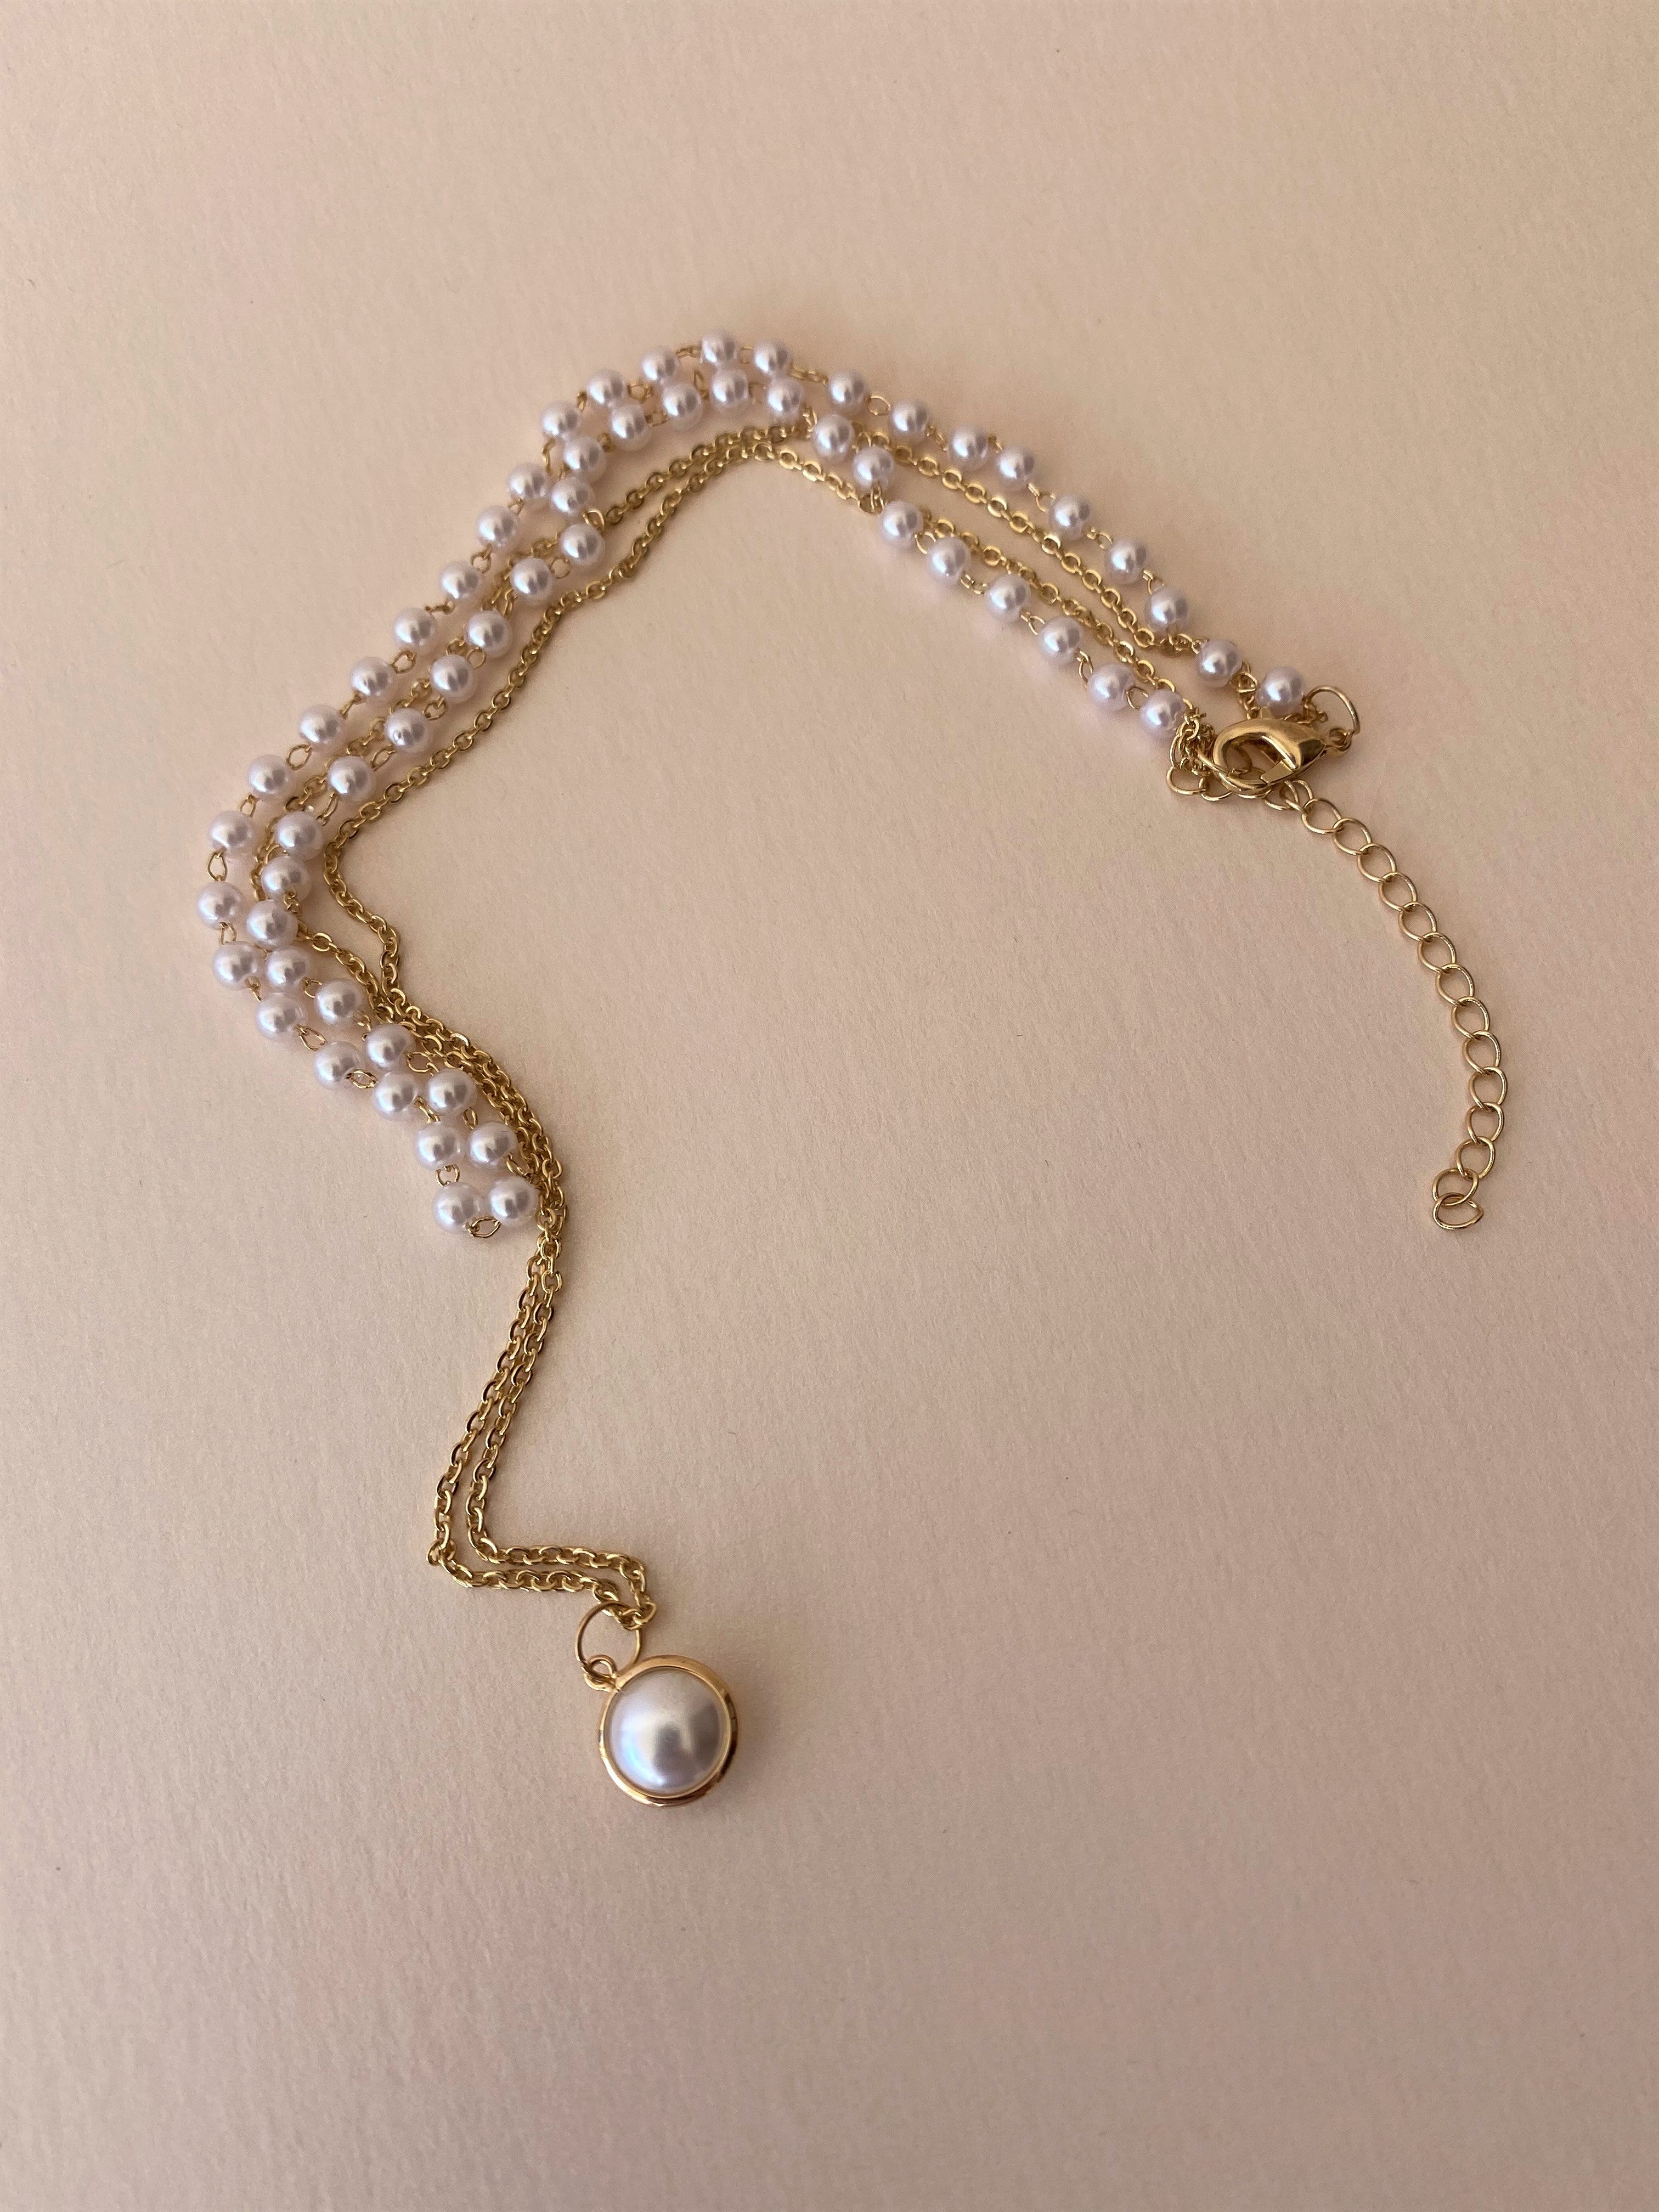 THE ELEANOR PEARL NECKLACE SET